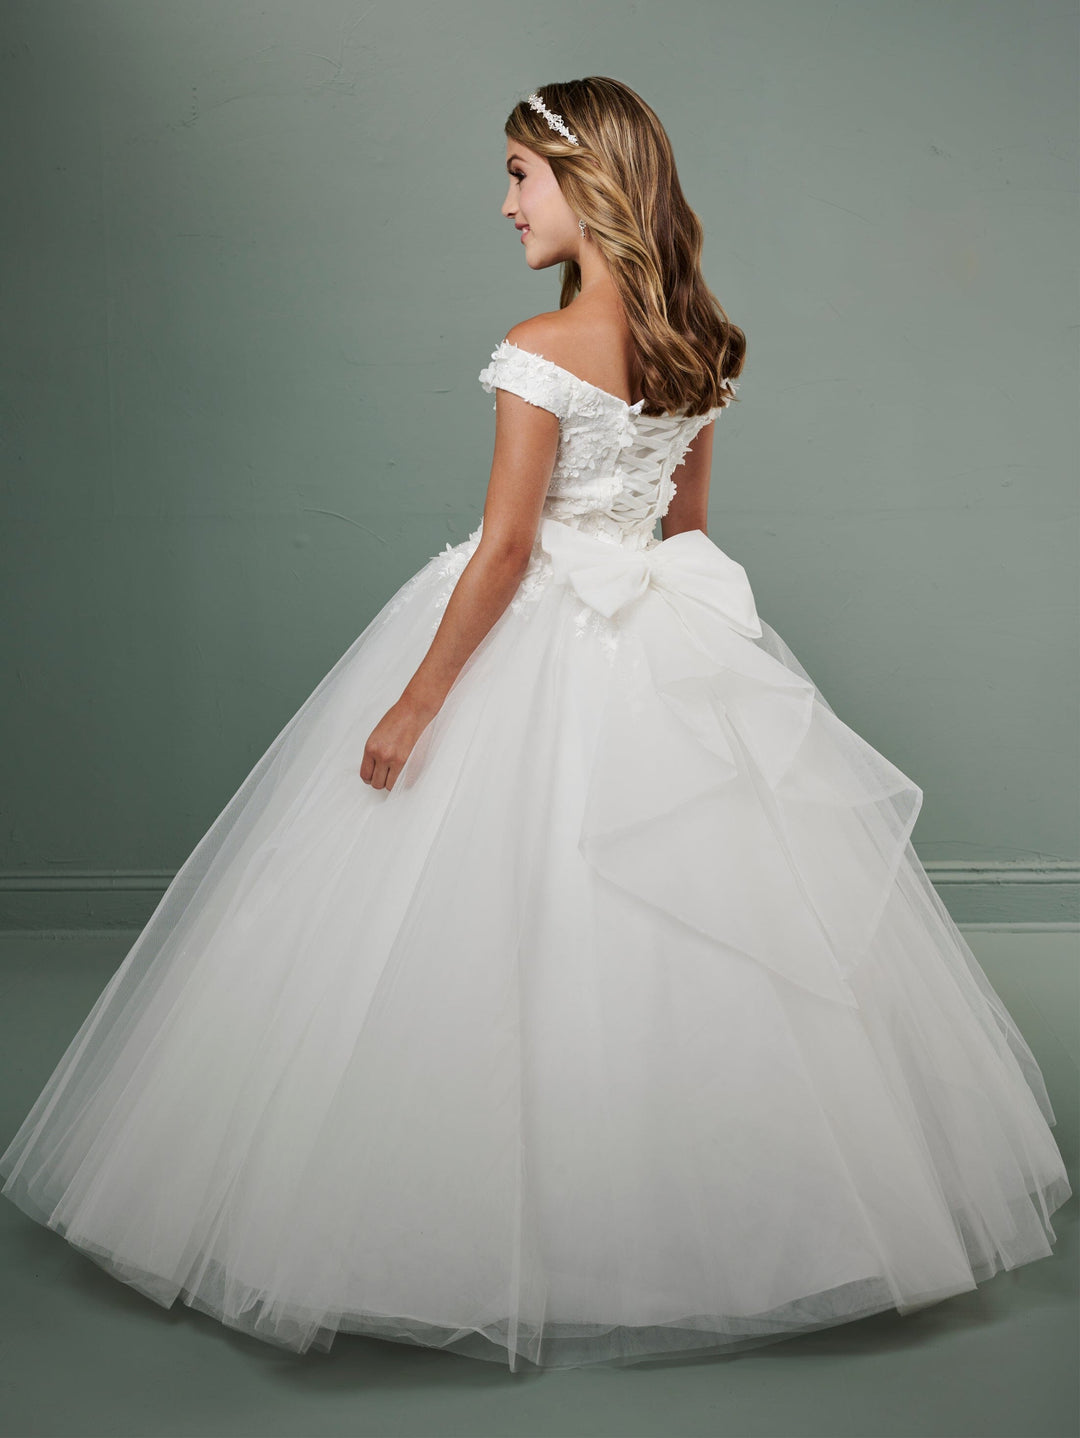 Girls Applique Off Shoulder Gown by Tiffany Princess 13714